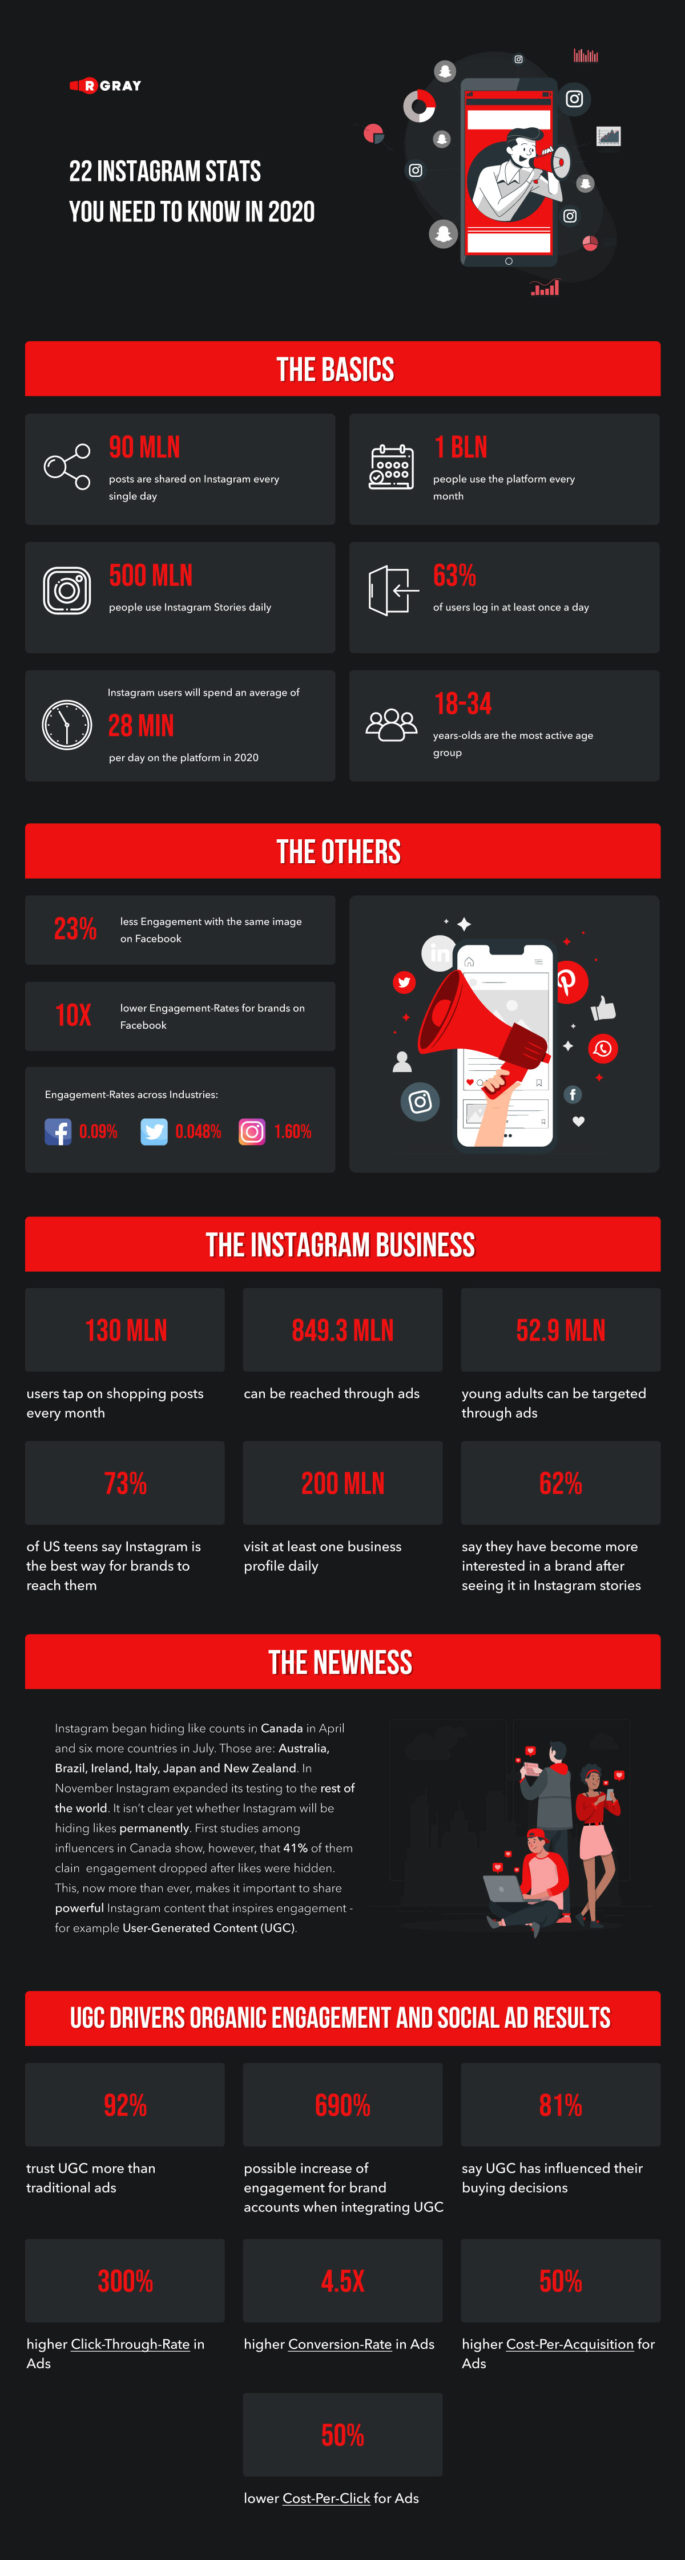 22 Instagram stats you need to know in 2020